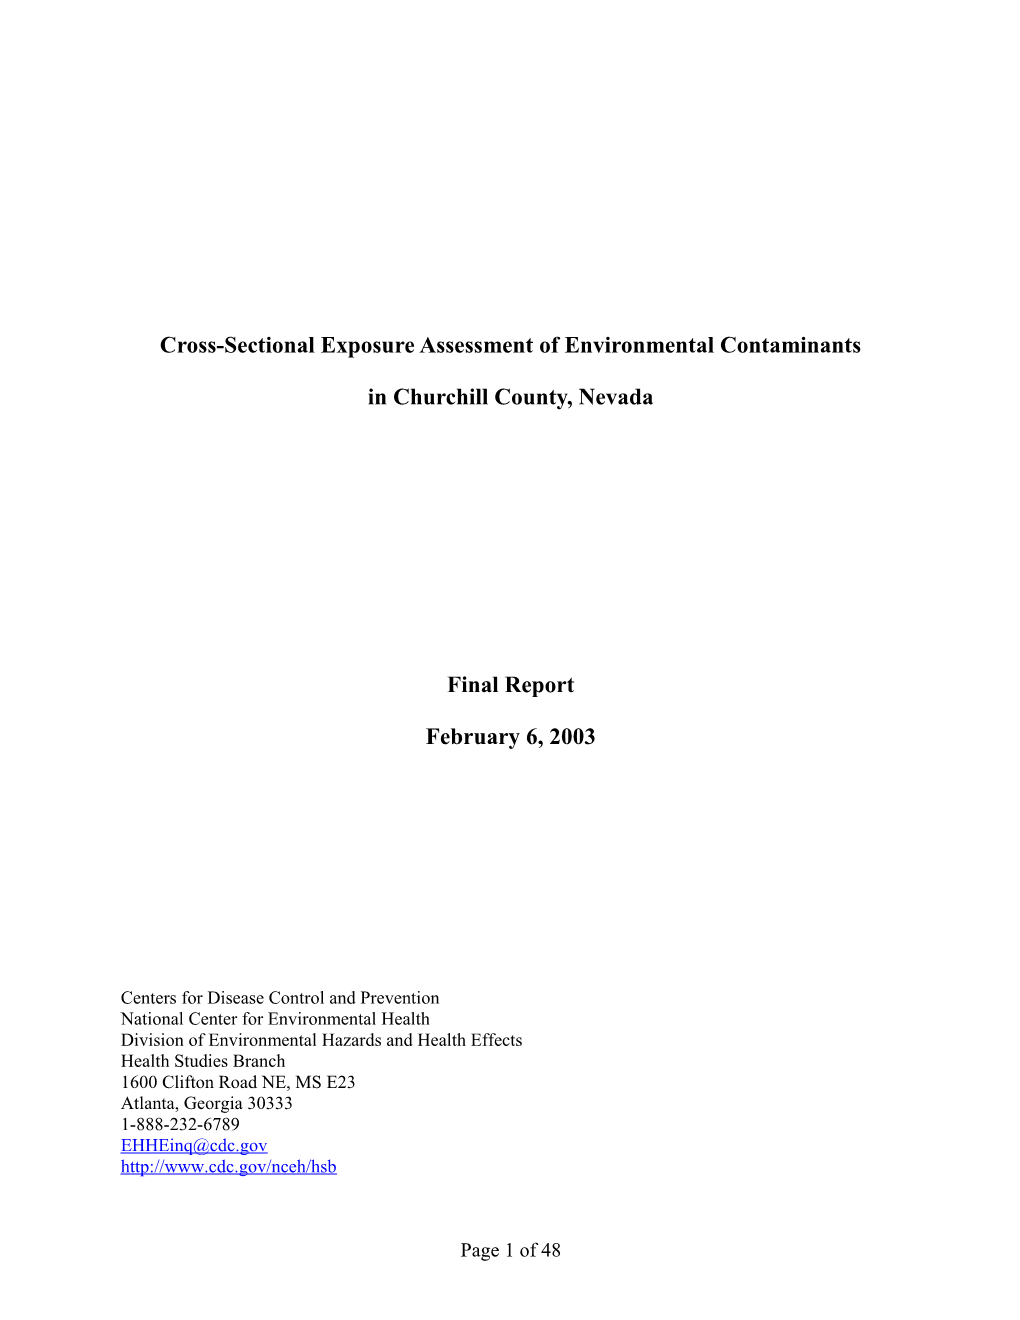 Cross-Sectional Exposure Assessment of Environmental Contaminants